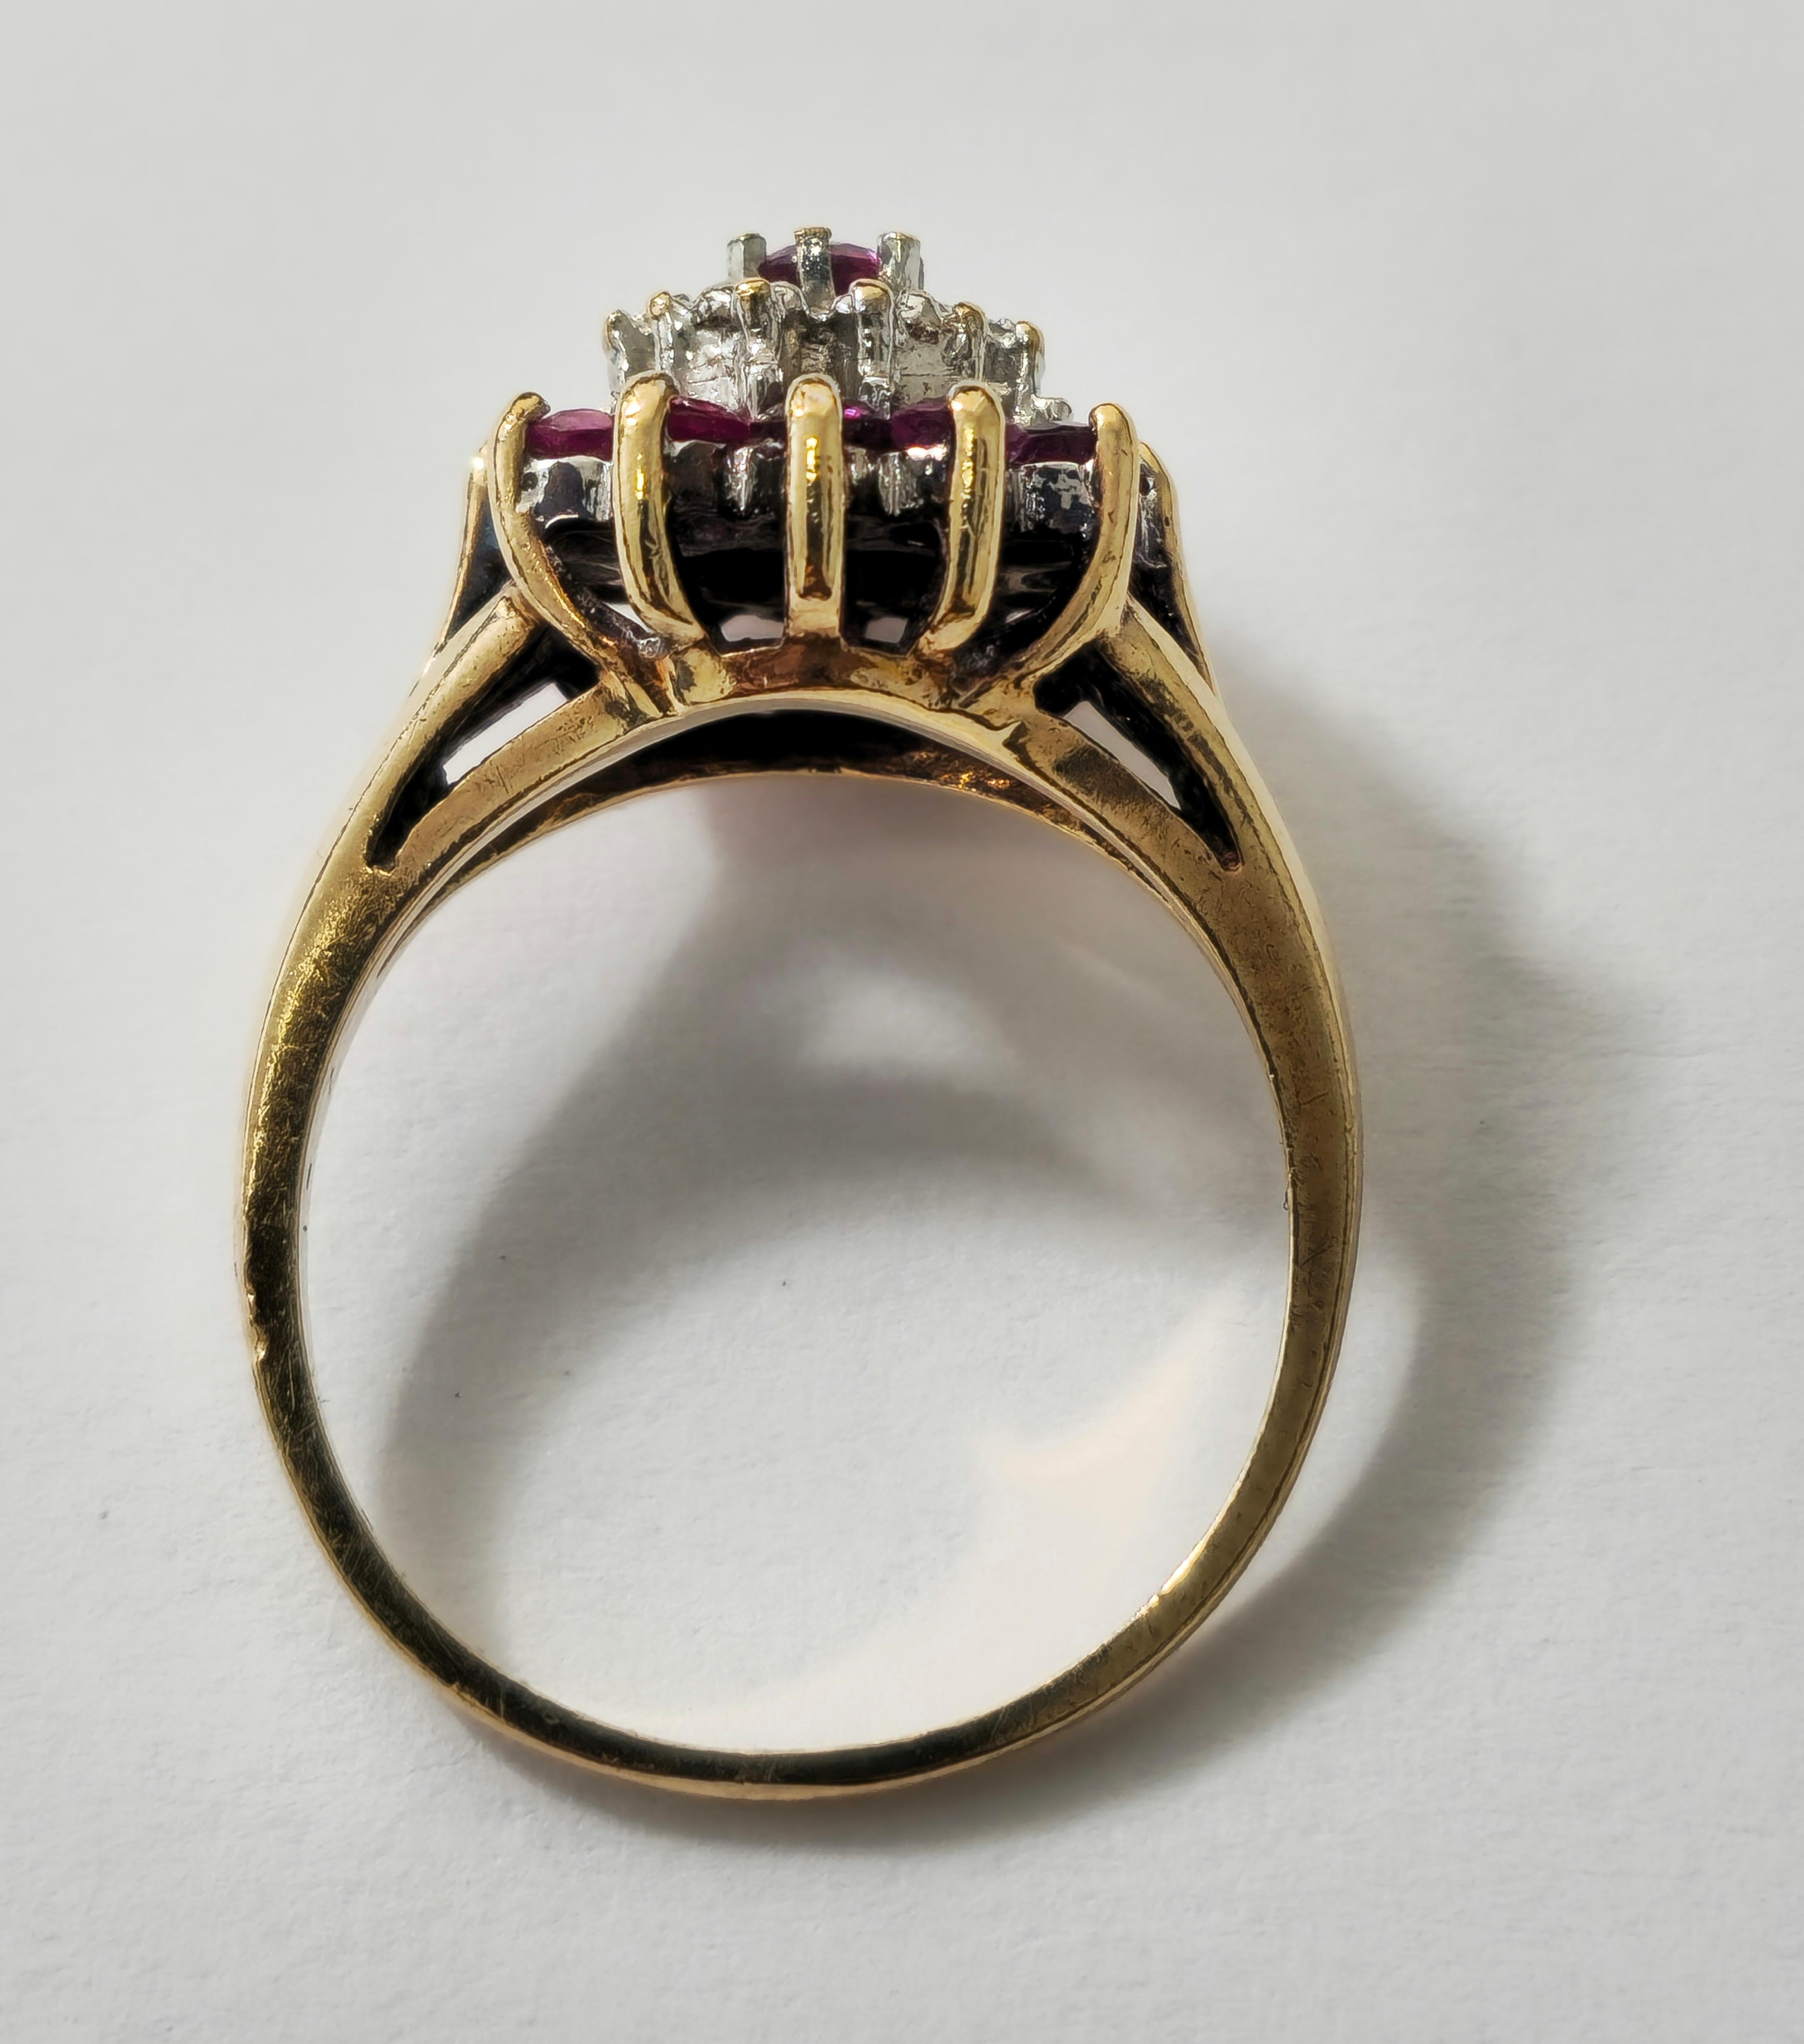 Vintage Natural 1.20 Carat Ruby & Diamond Cocktail Ring in 14k yellow gold In Excellent Condition For Sale In Miami, FL